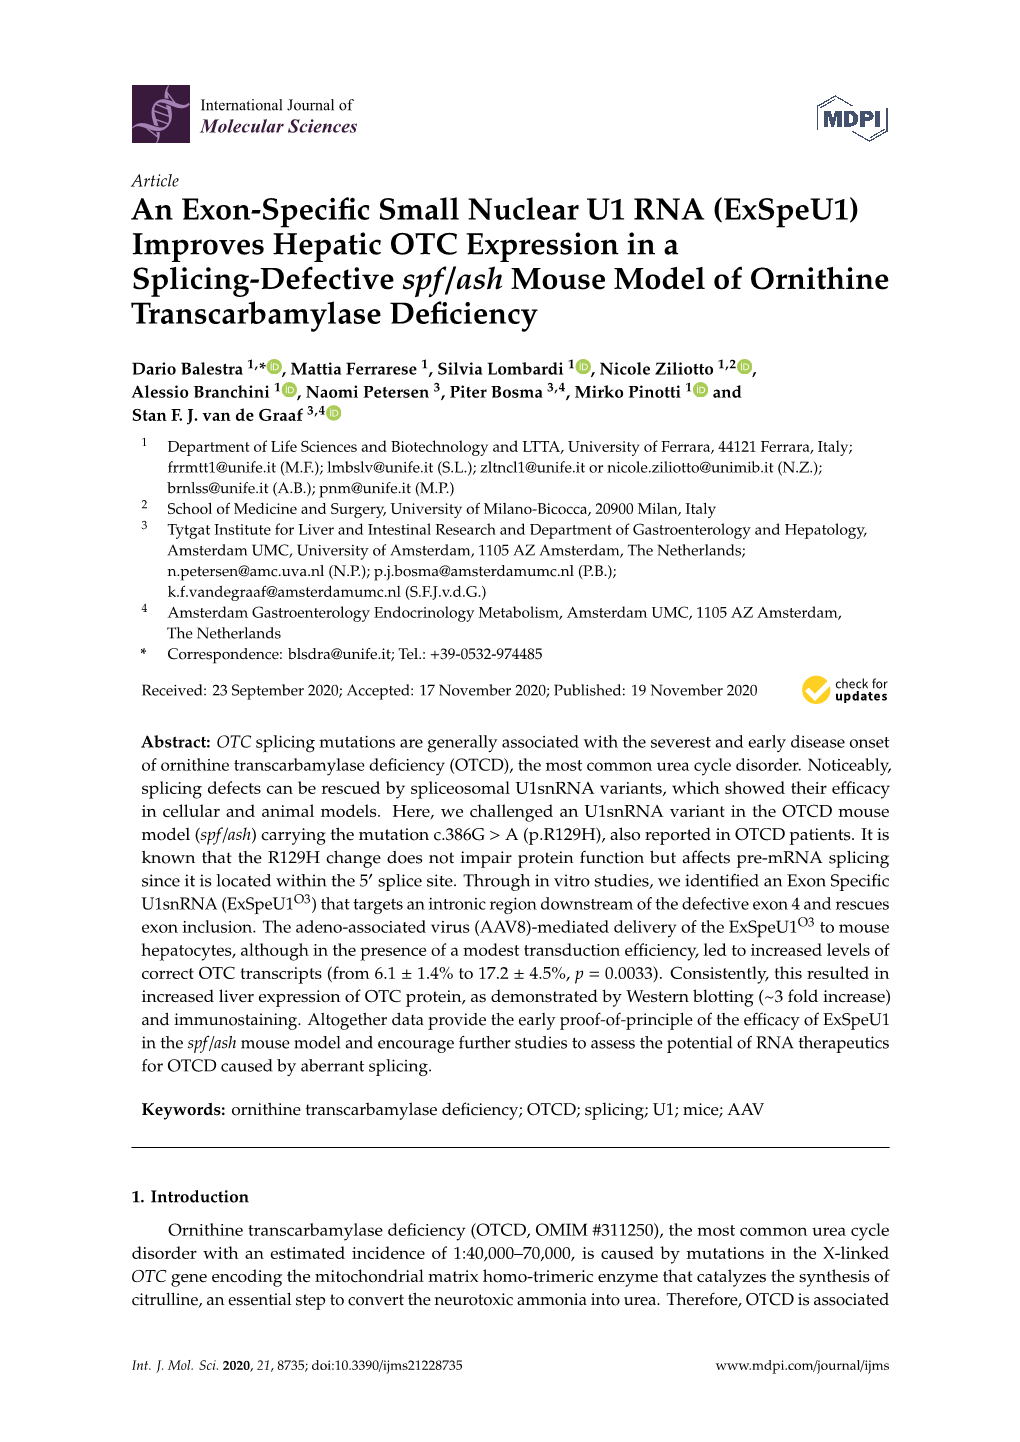 Improves Hepatic OTC Expression in a Splicing-Defective Spf/Ash Mouse Model of Ornithine Transcarbamylase Deﬁciency